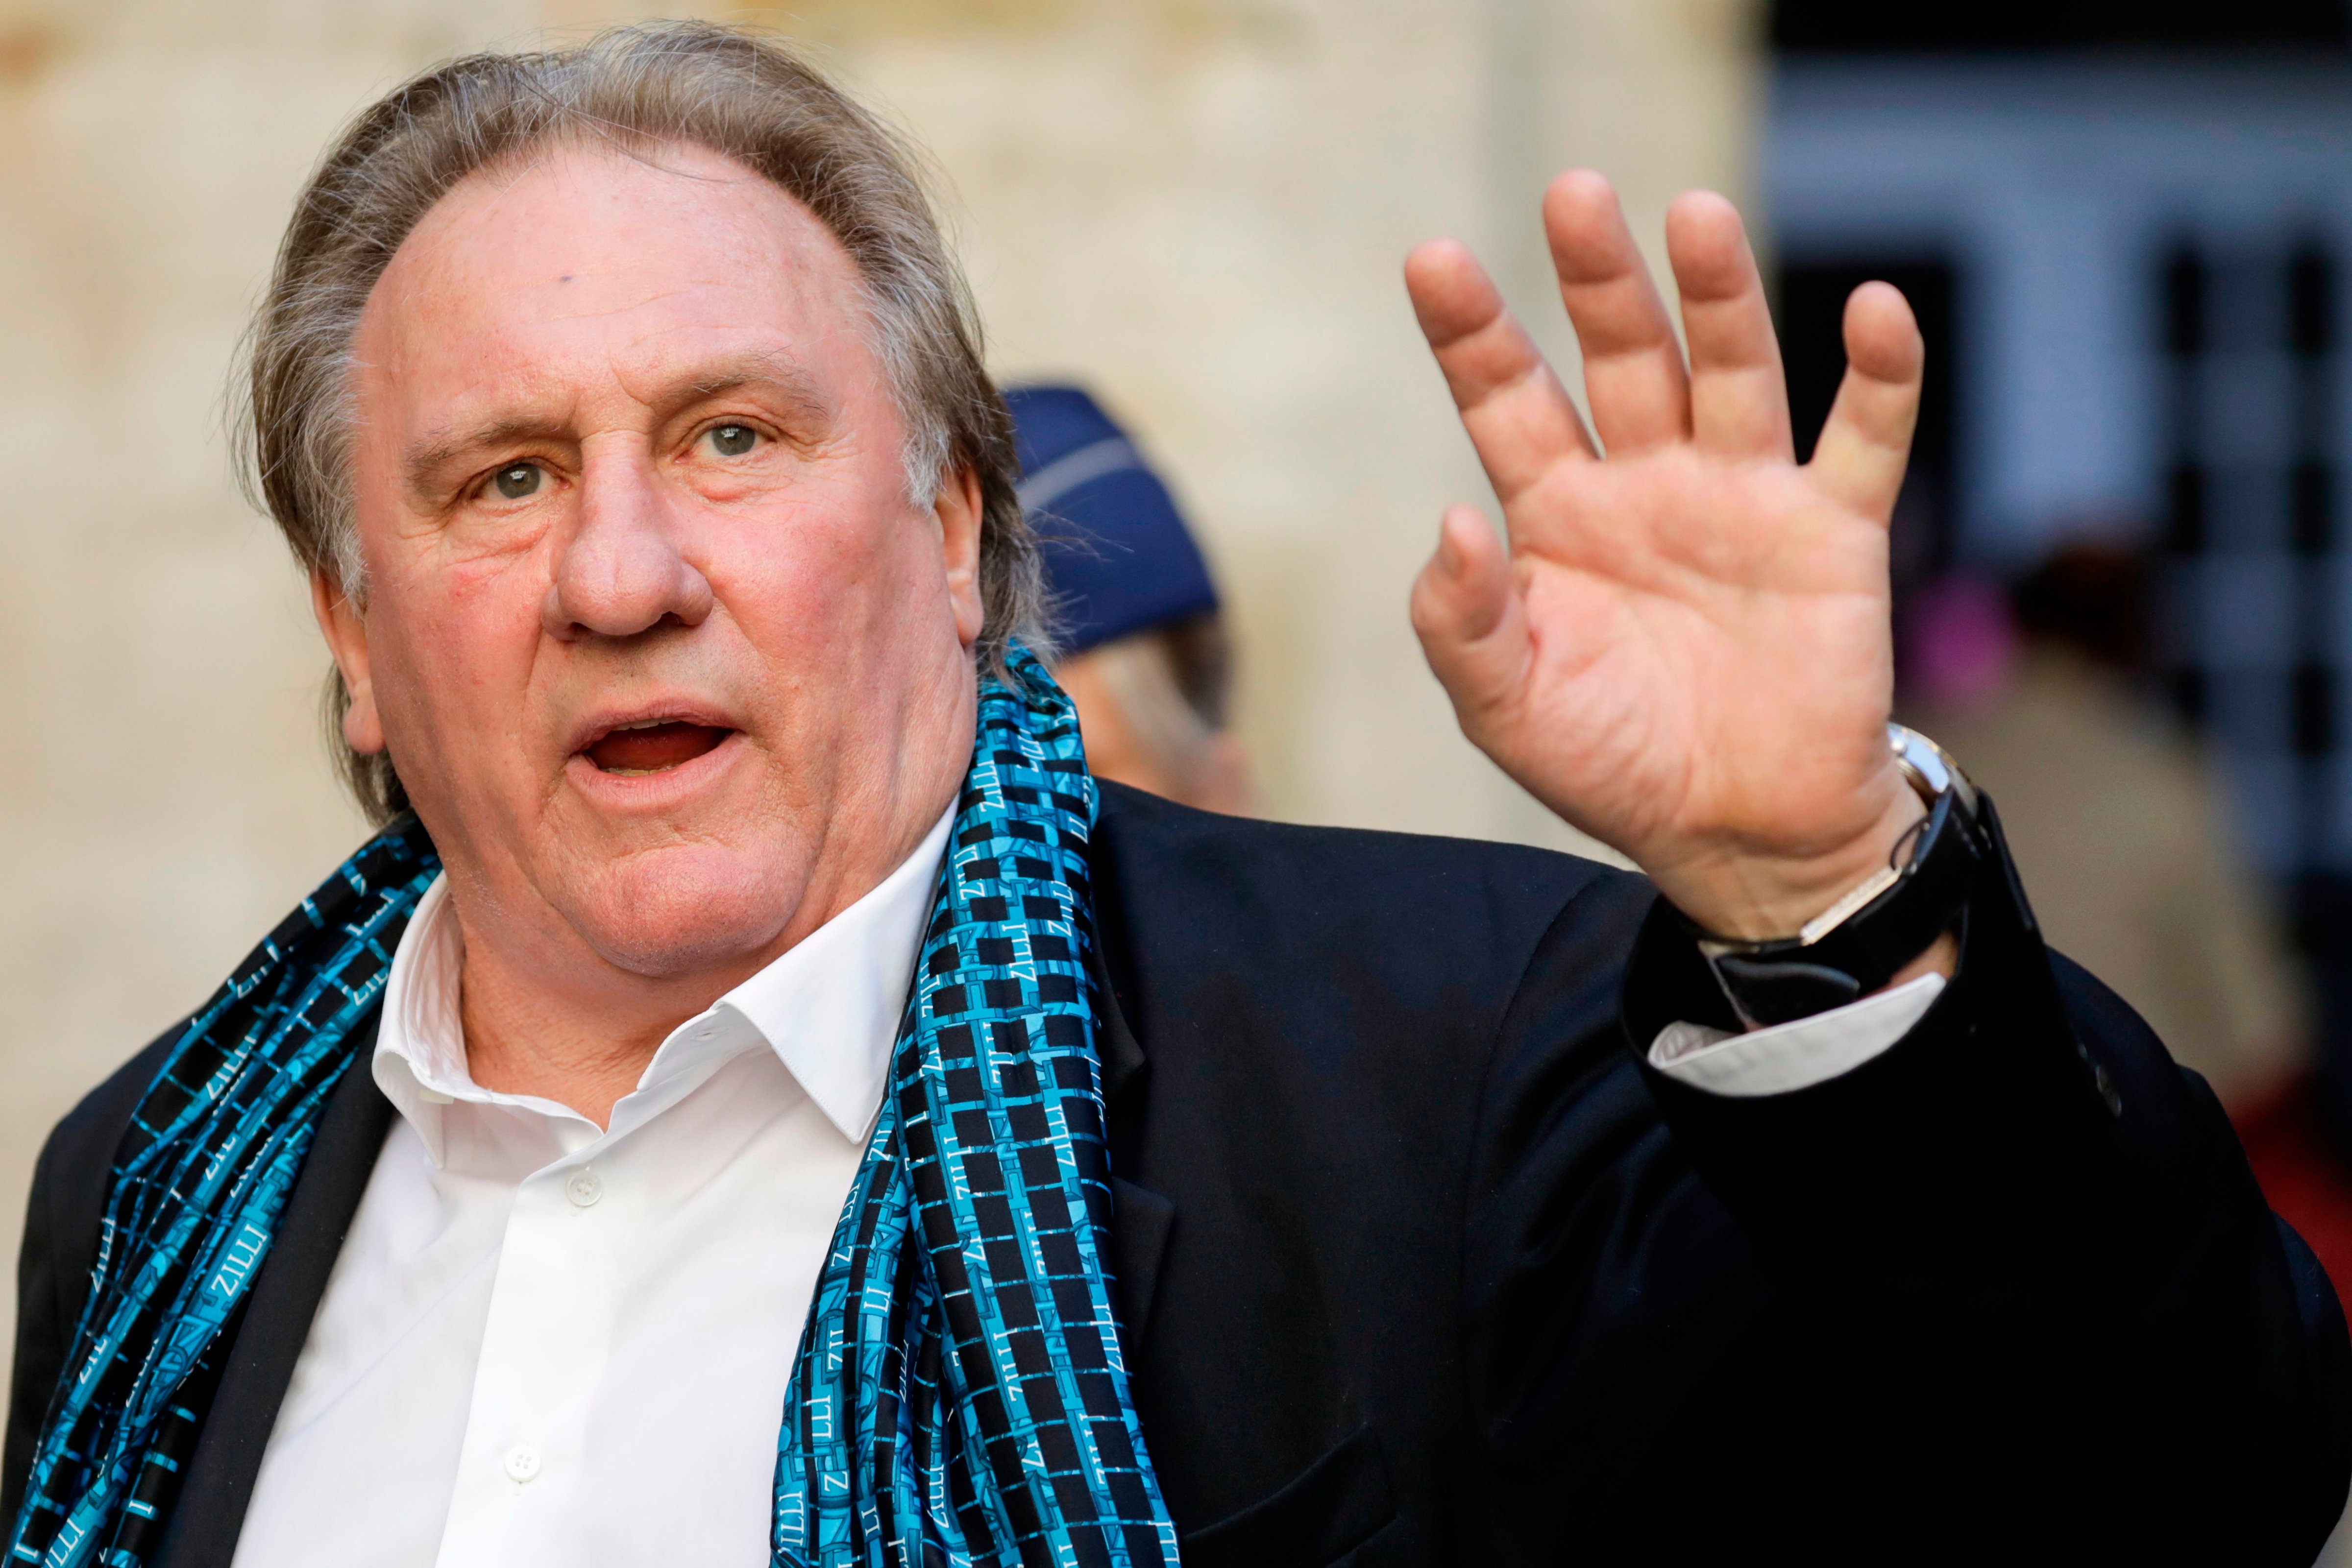 (FILES) In this file photo taken on June 25, 2018, French actor Gerard Depardieu waves as he arrives at the Town Hall in Brussels for a ceremony as part of the 'Brussels International Film Festival' (Photo by THIERRY ROGE / BELGA / AFP) / Belgium OUT (Photo credit should read THIERRY ROGE/AFP/Getty Images) (THIERRY ROGE—AFP/Getty Images)